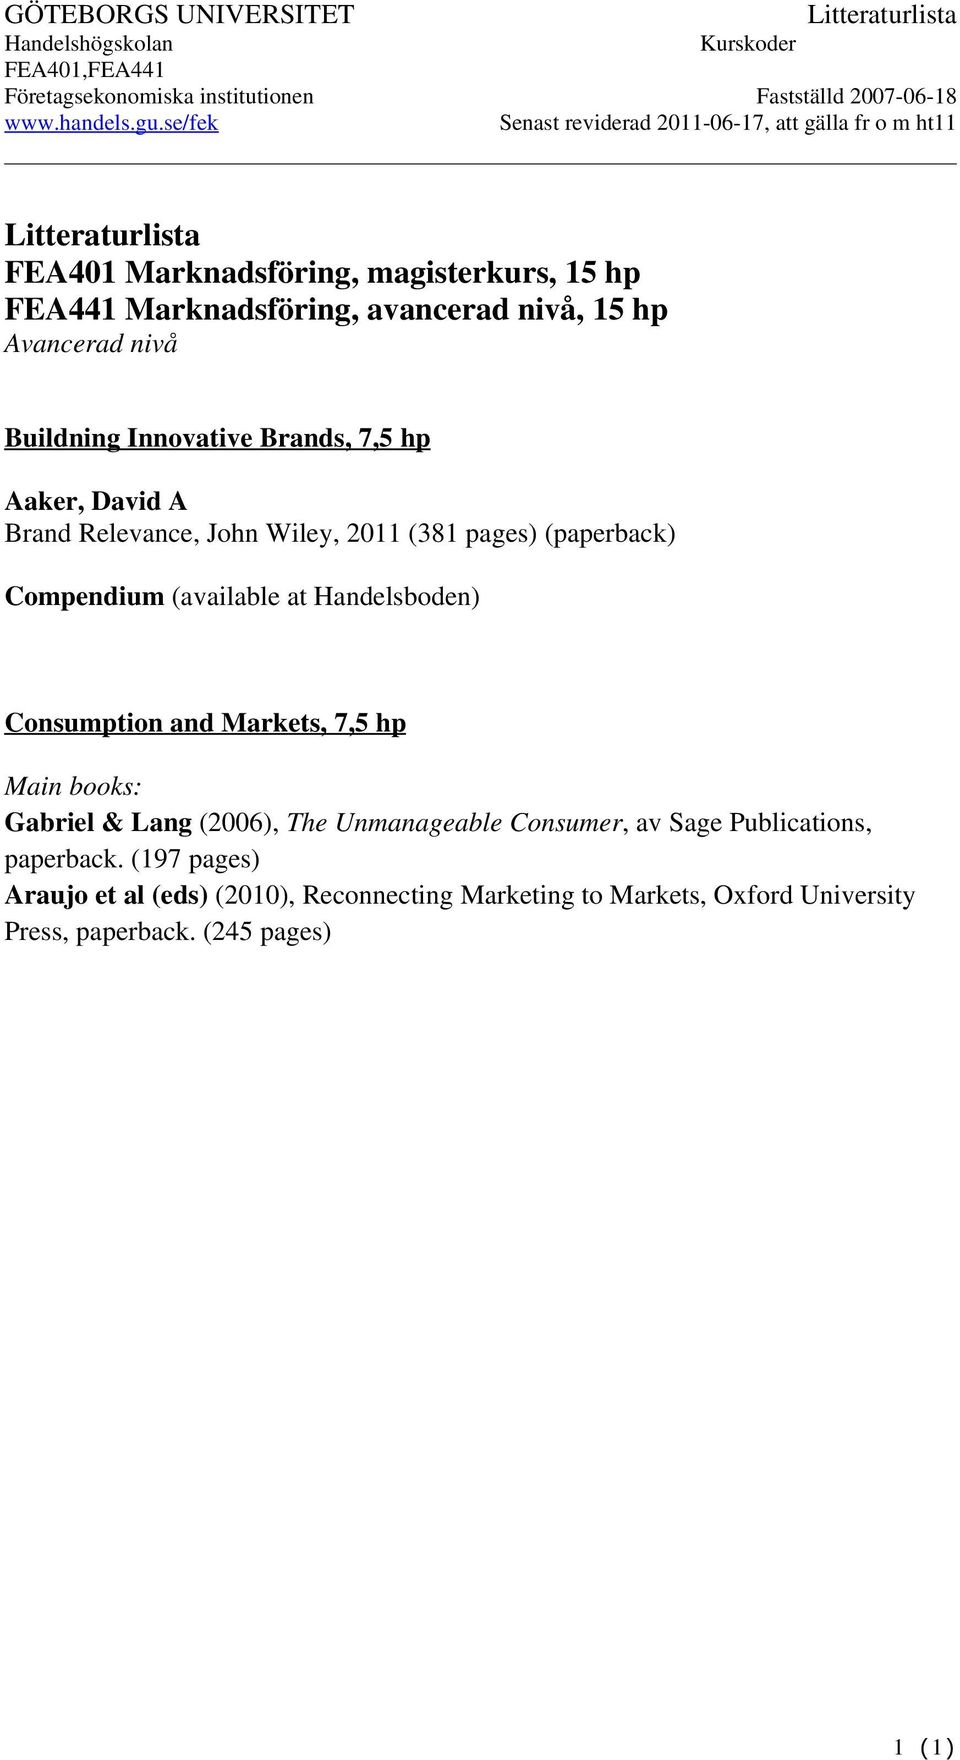 Buildning Innovative Brands, 7,5 hp Aaker, David A Brand Relevance, John Wiley, 2011 (381 pages) (paperback) Compendium (available at Handelsboden) Consumption and Markets, 7,5 hp